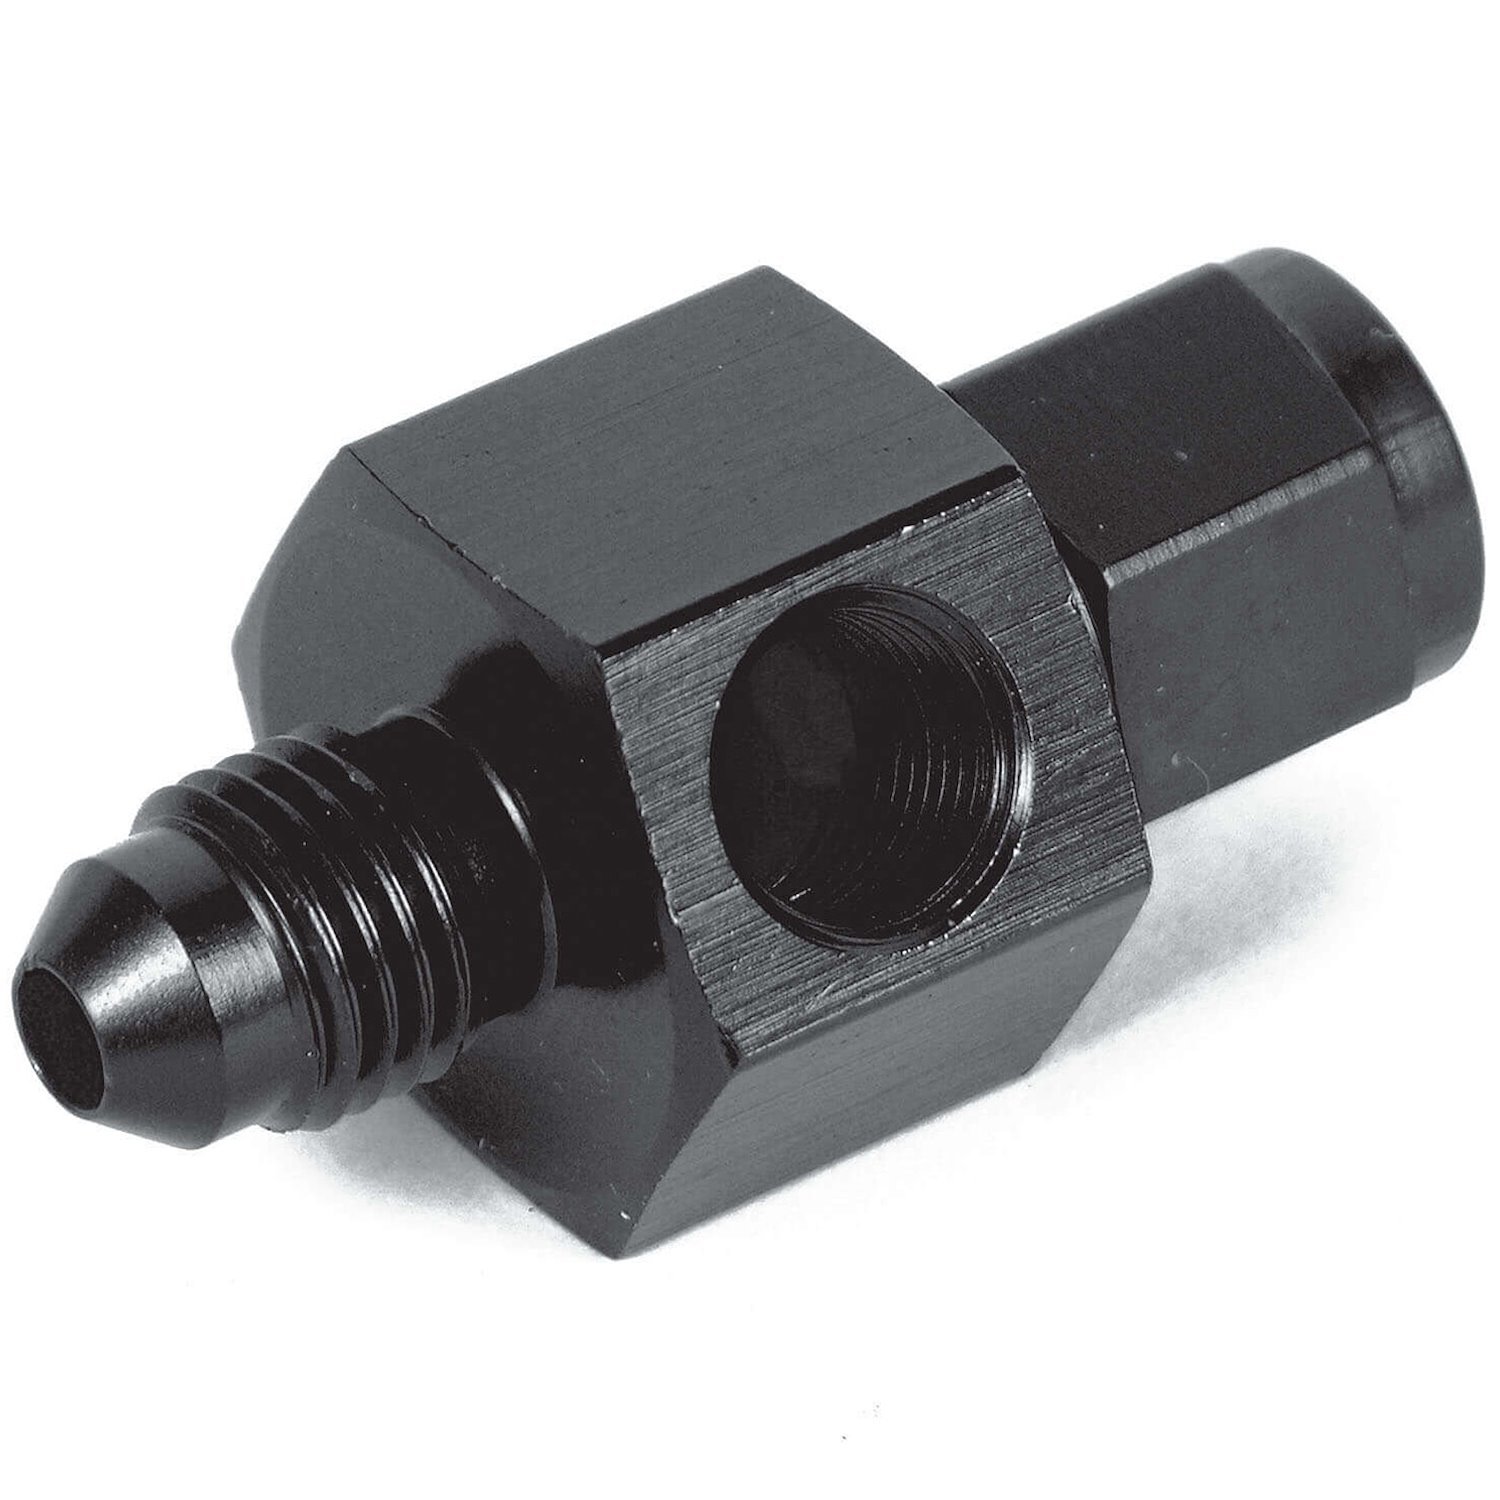 Fuel Pressure Gauge Adapter Fitting [-4 AN Male to -4 AN Female]